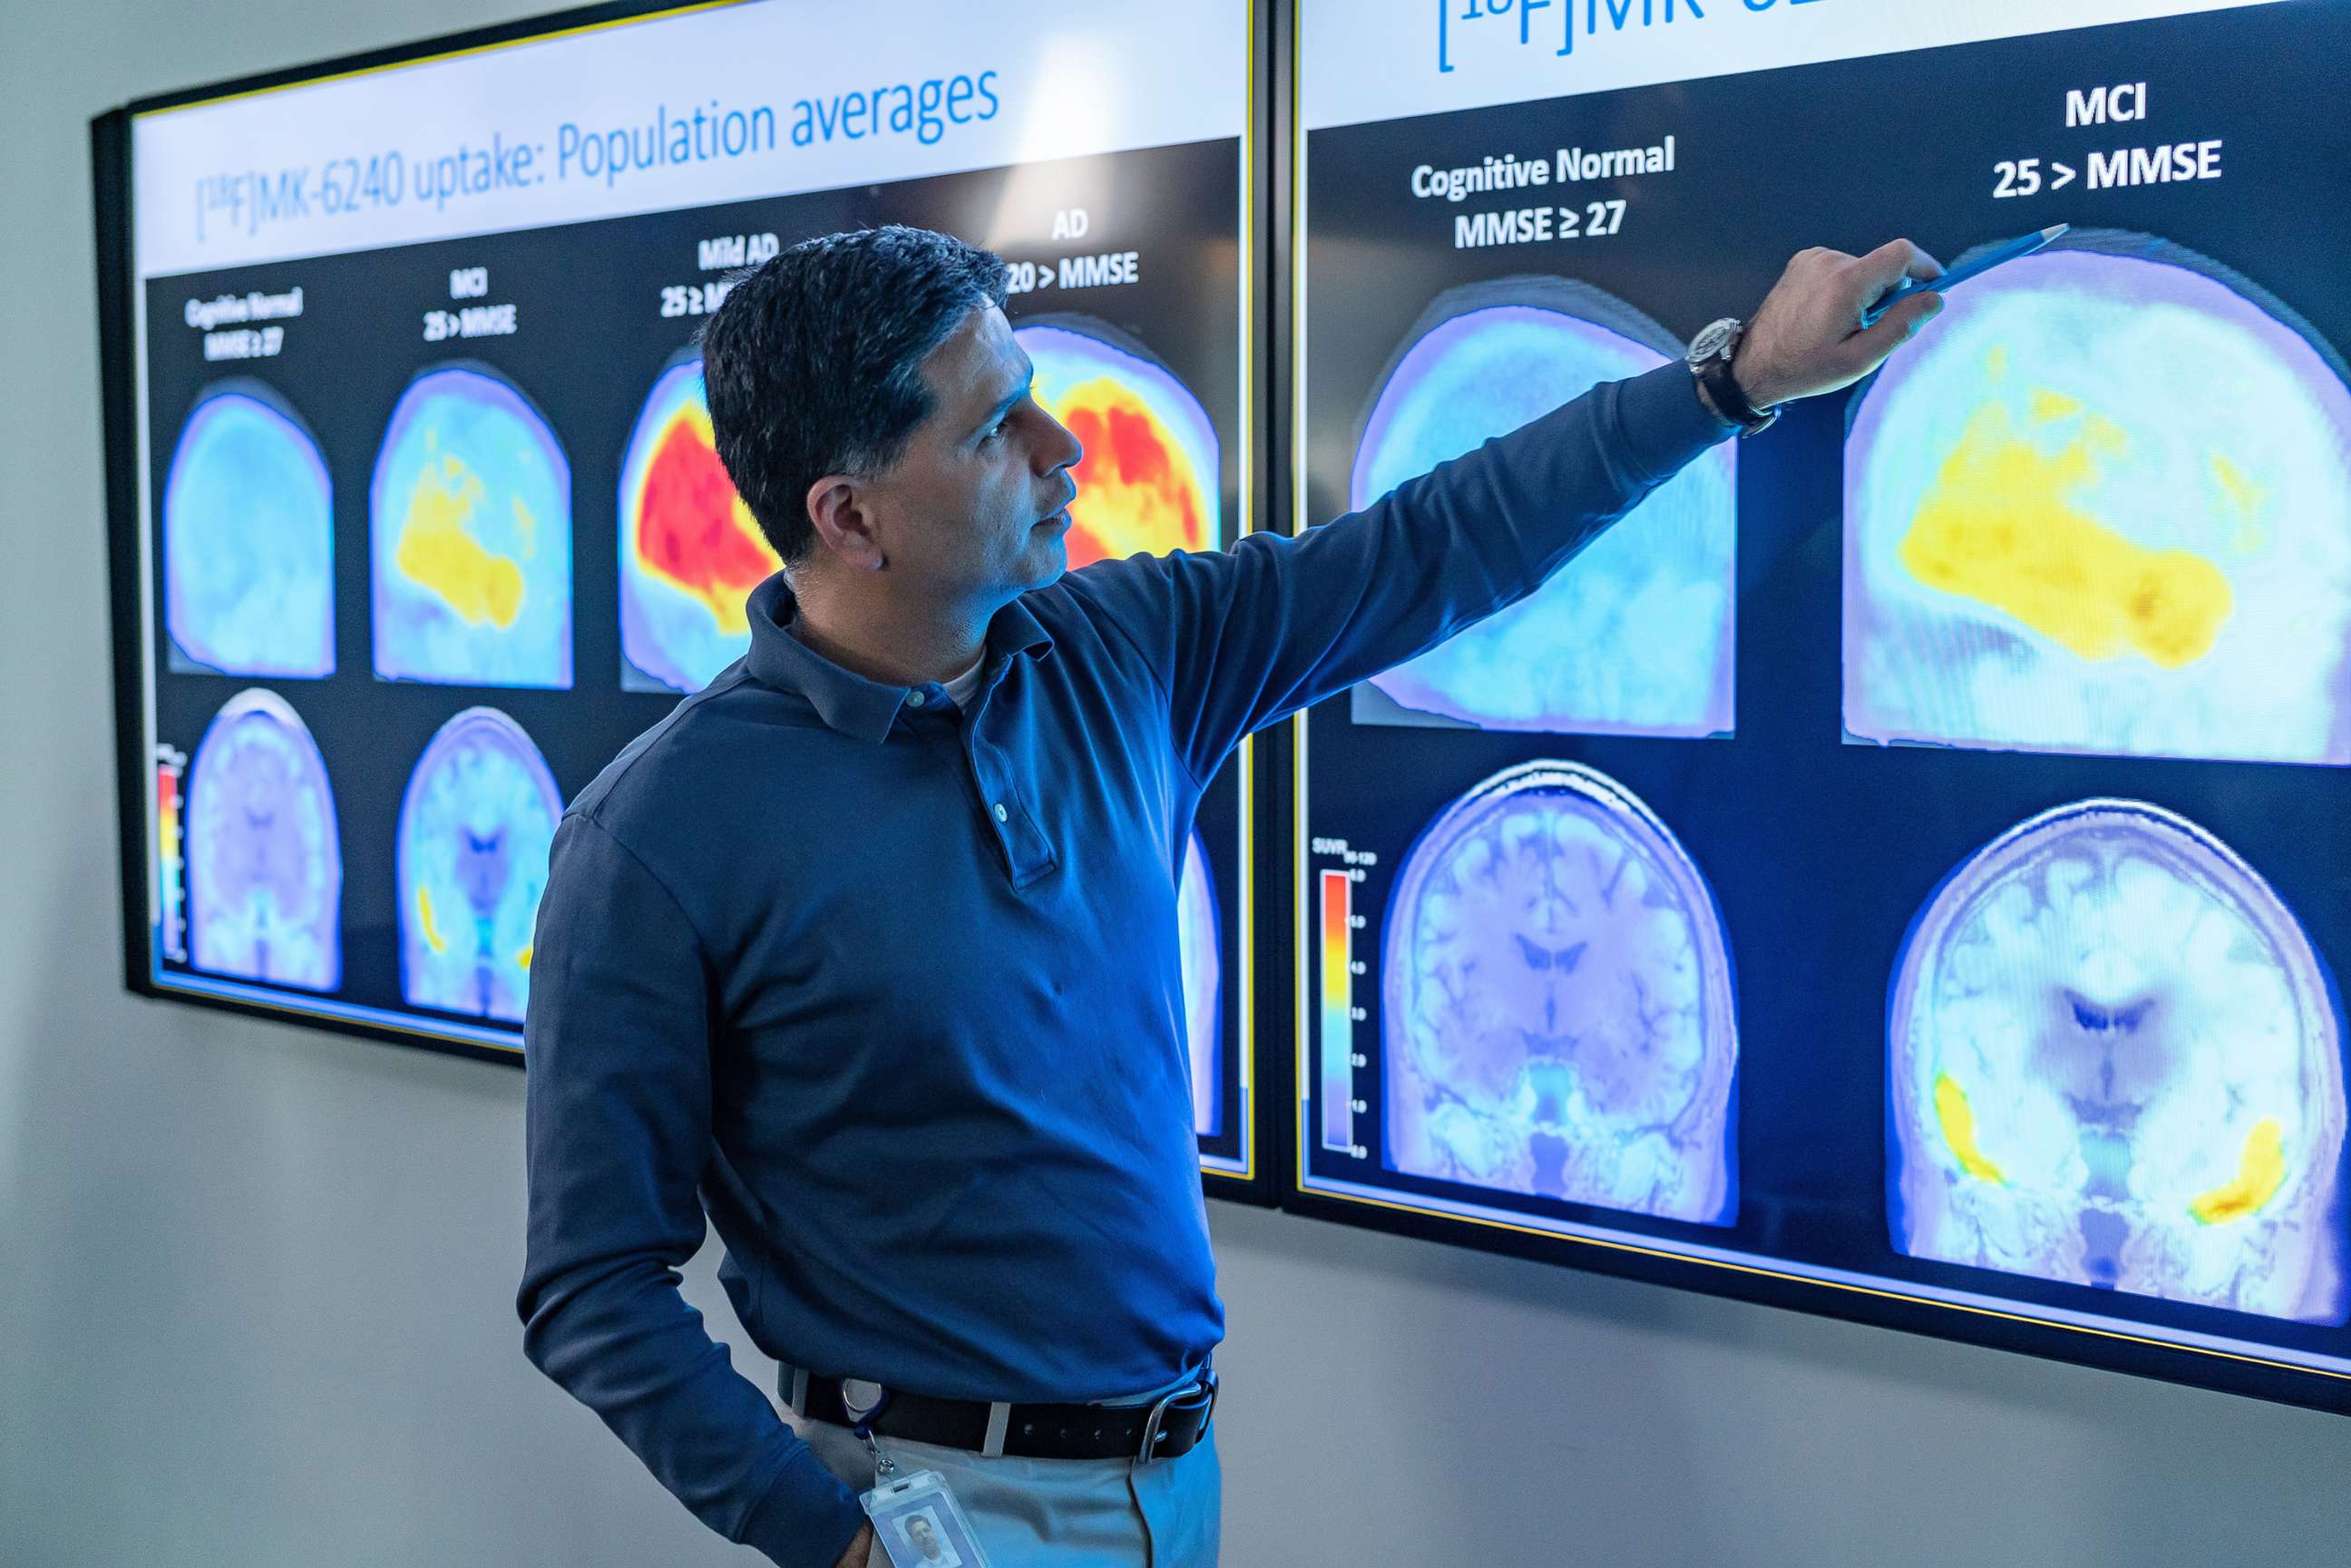 PHOTO: A man points to images of the brain in a handout photo released by Biogen in connection with the approval of their Alzheimer's medication Aduhelm, in Cambridge, Mass., June 8, 2021.